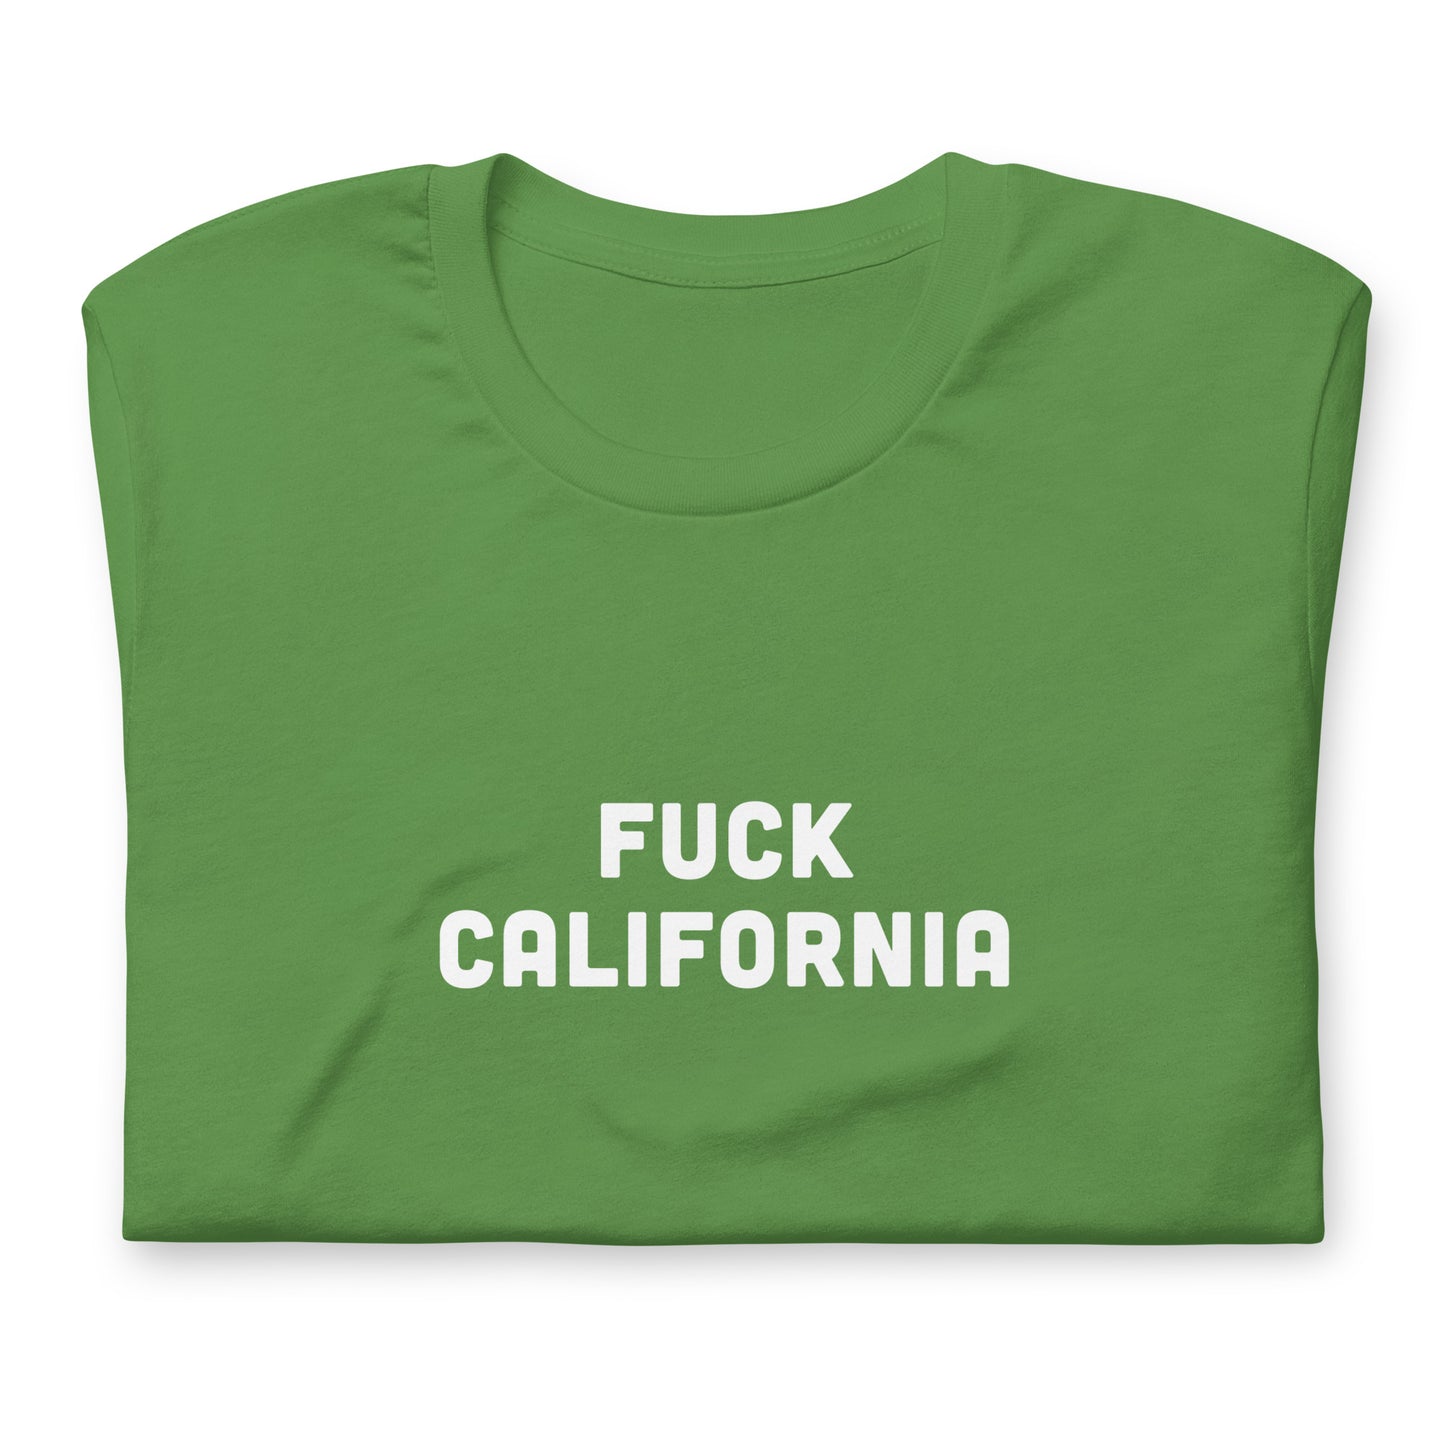 Fuck California T-Shirt Size S Color Forest